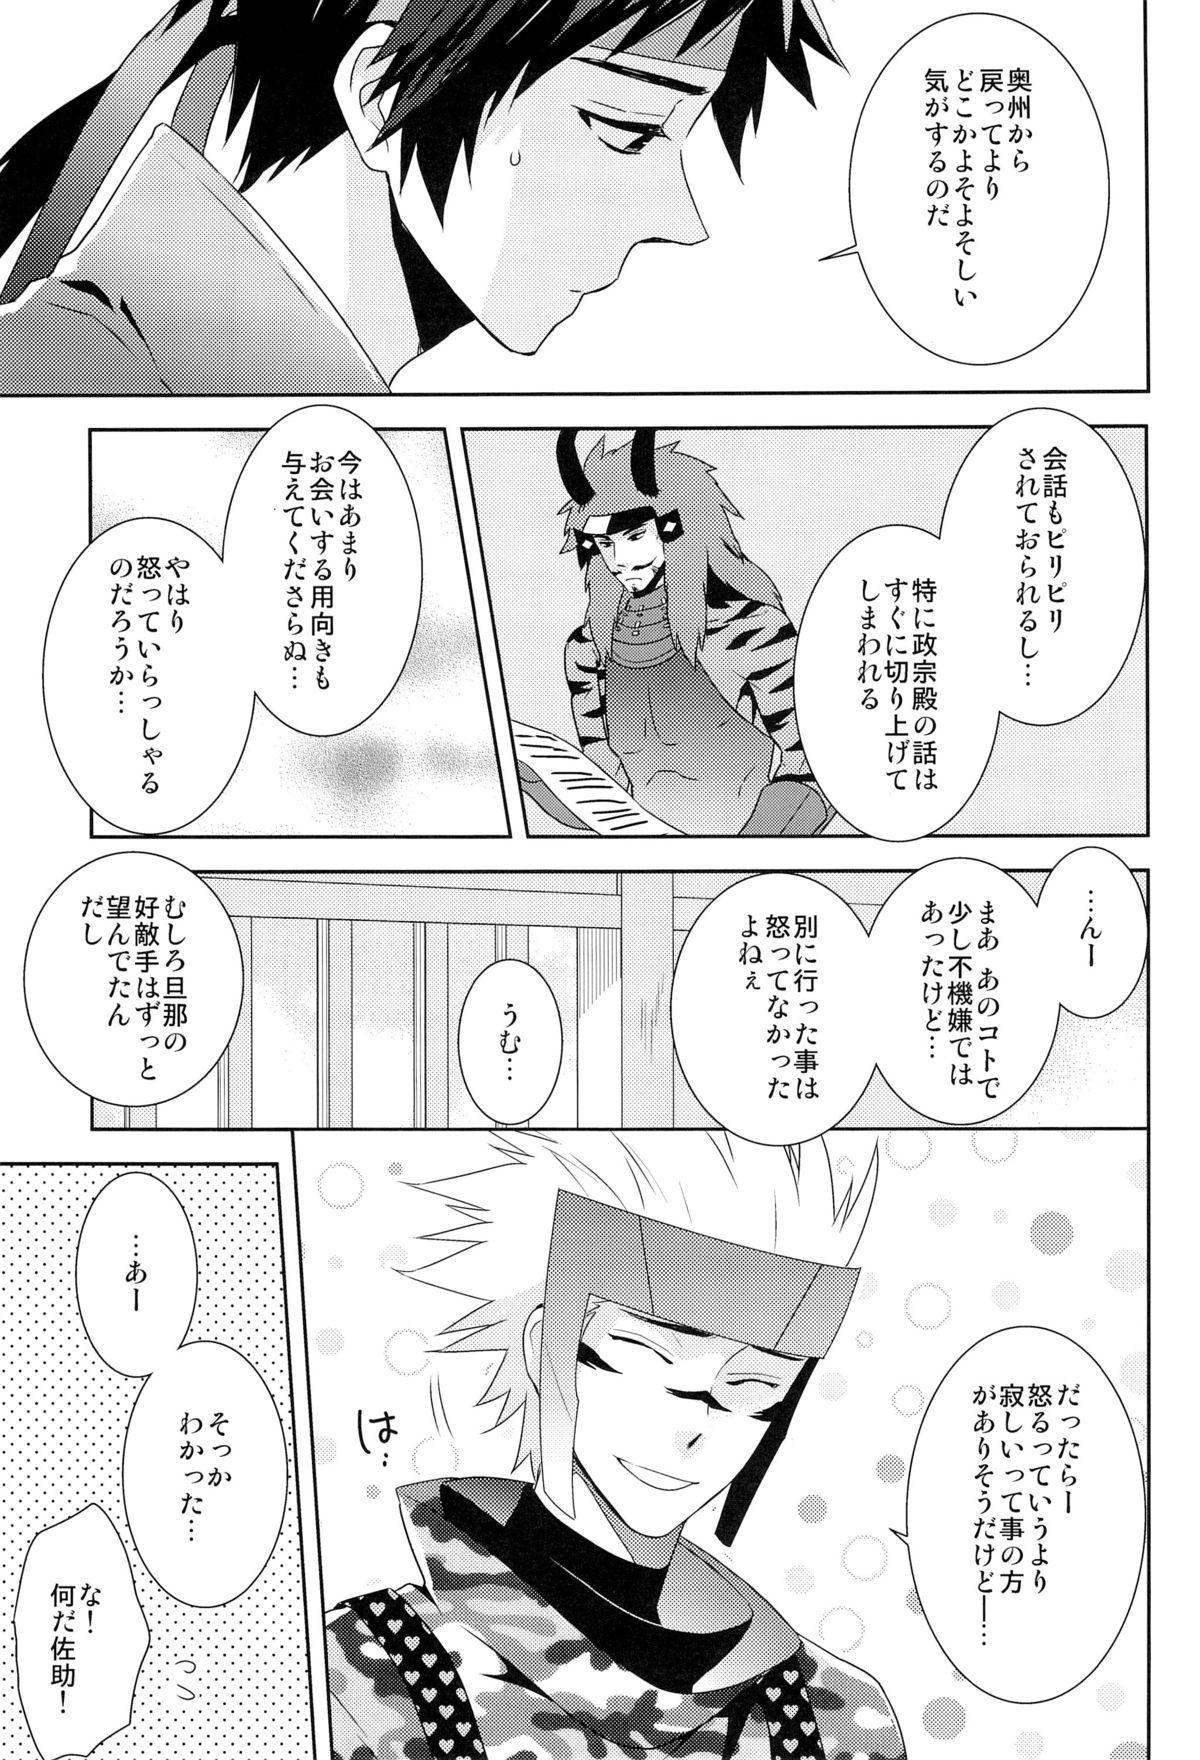 Curious envy - Sengoku basara Pussy To Mouth - Page 7